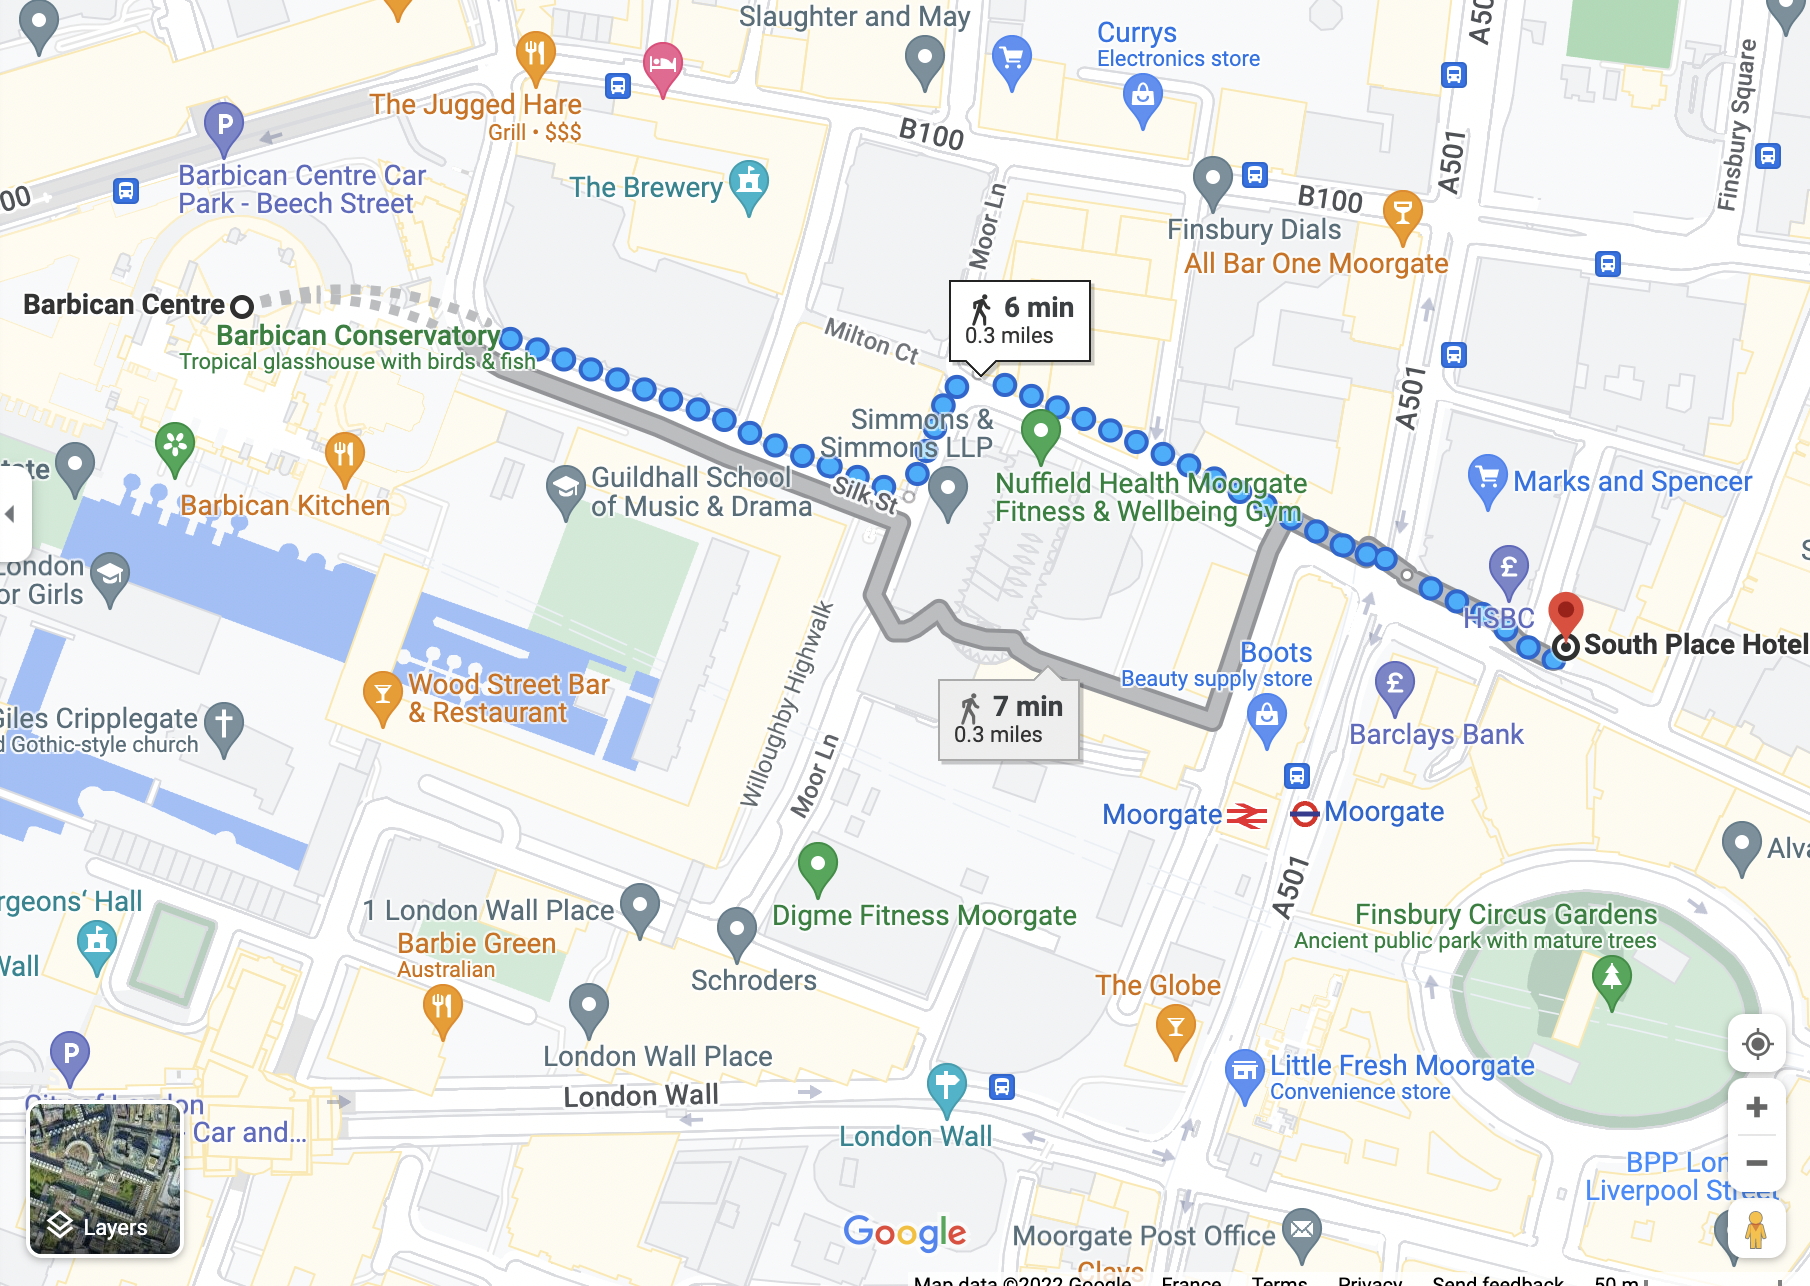 Google maps directions from Barbican Centre to South Place Hotel